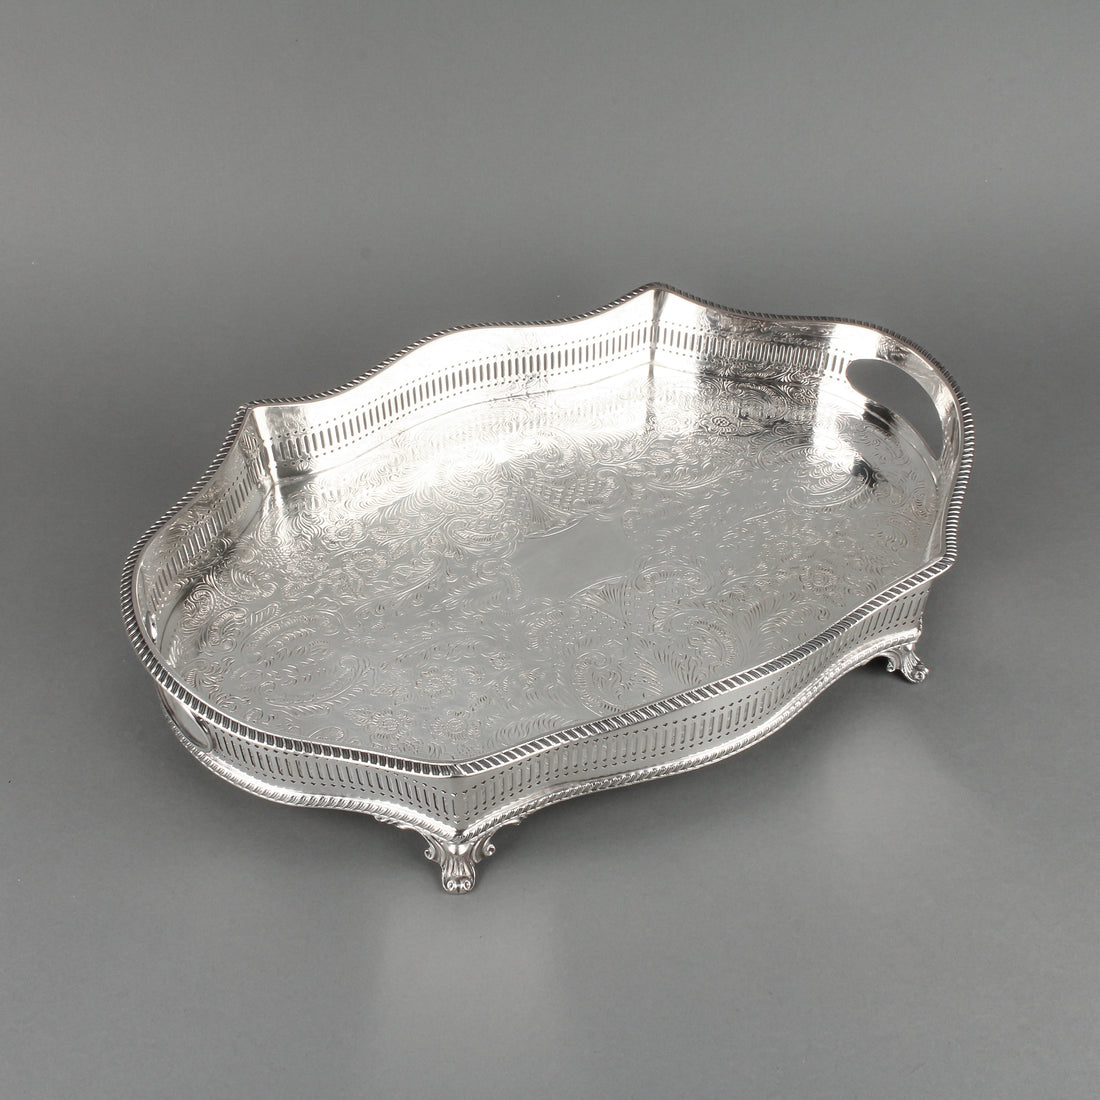 A1 CO. Silverplate Footed Oval Gallery Tray